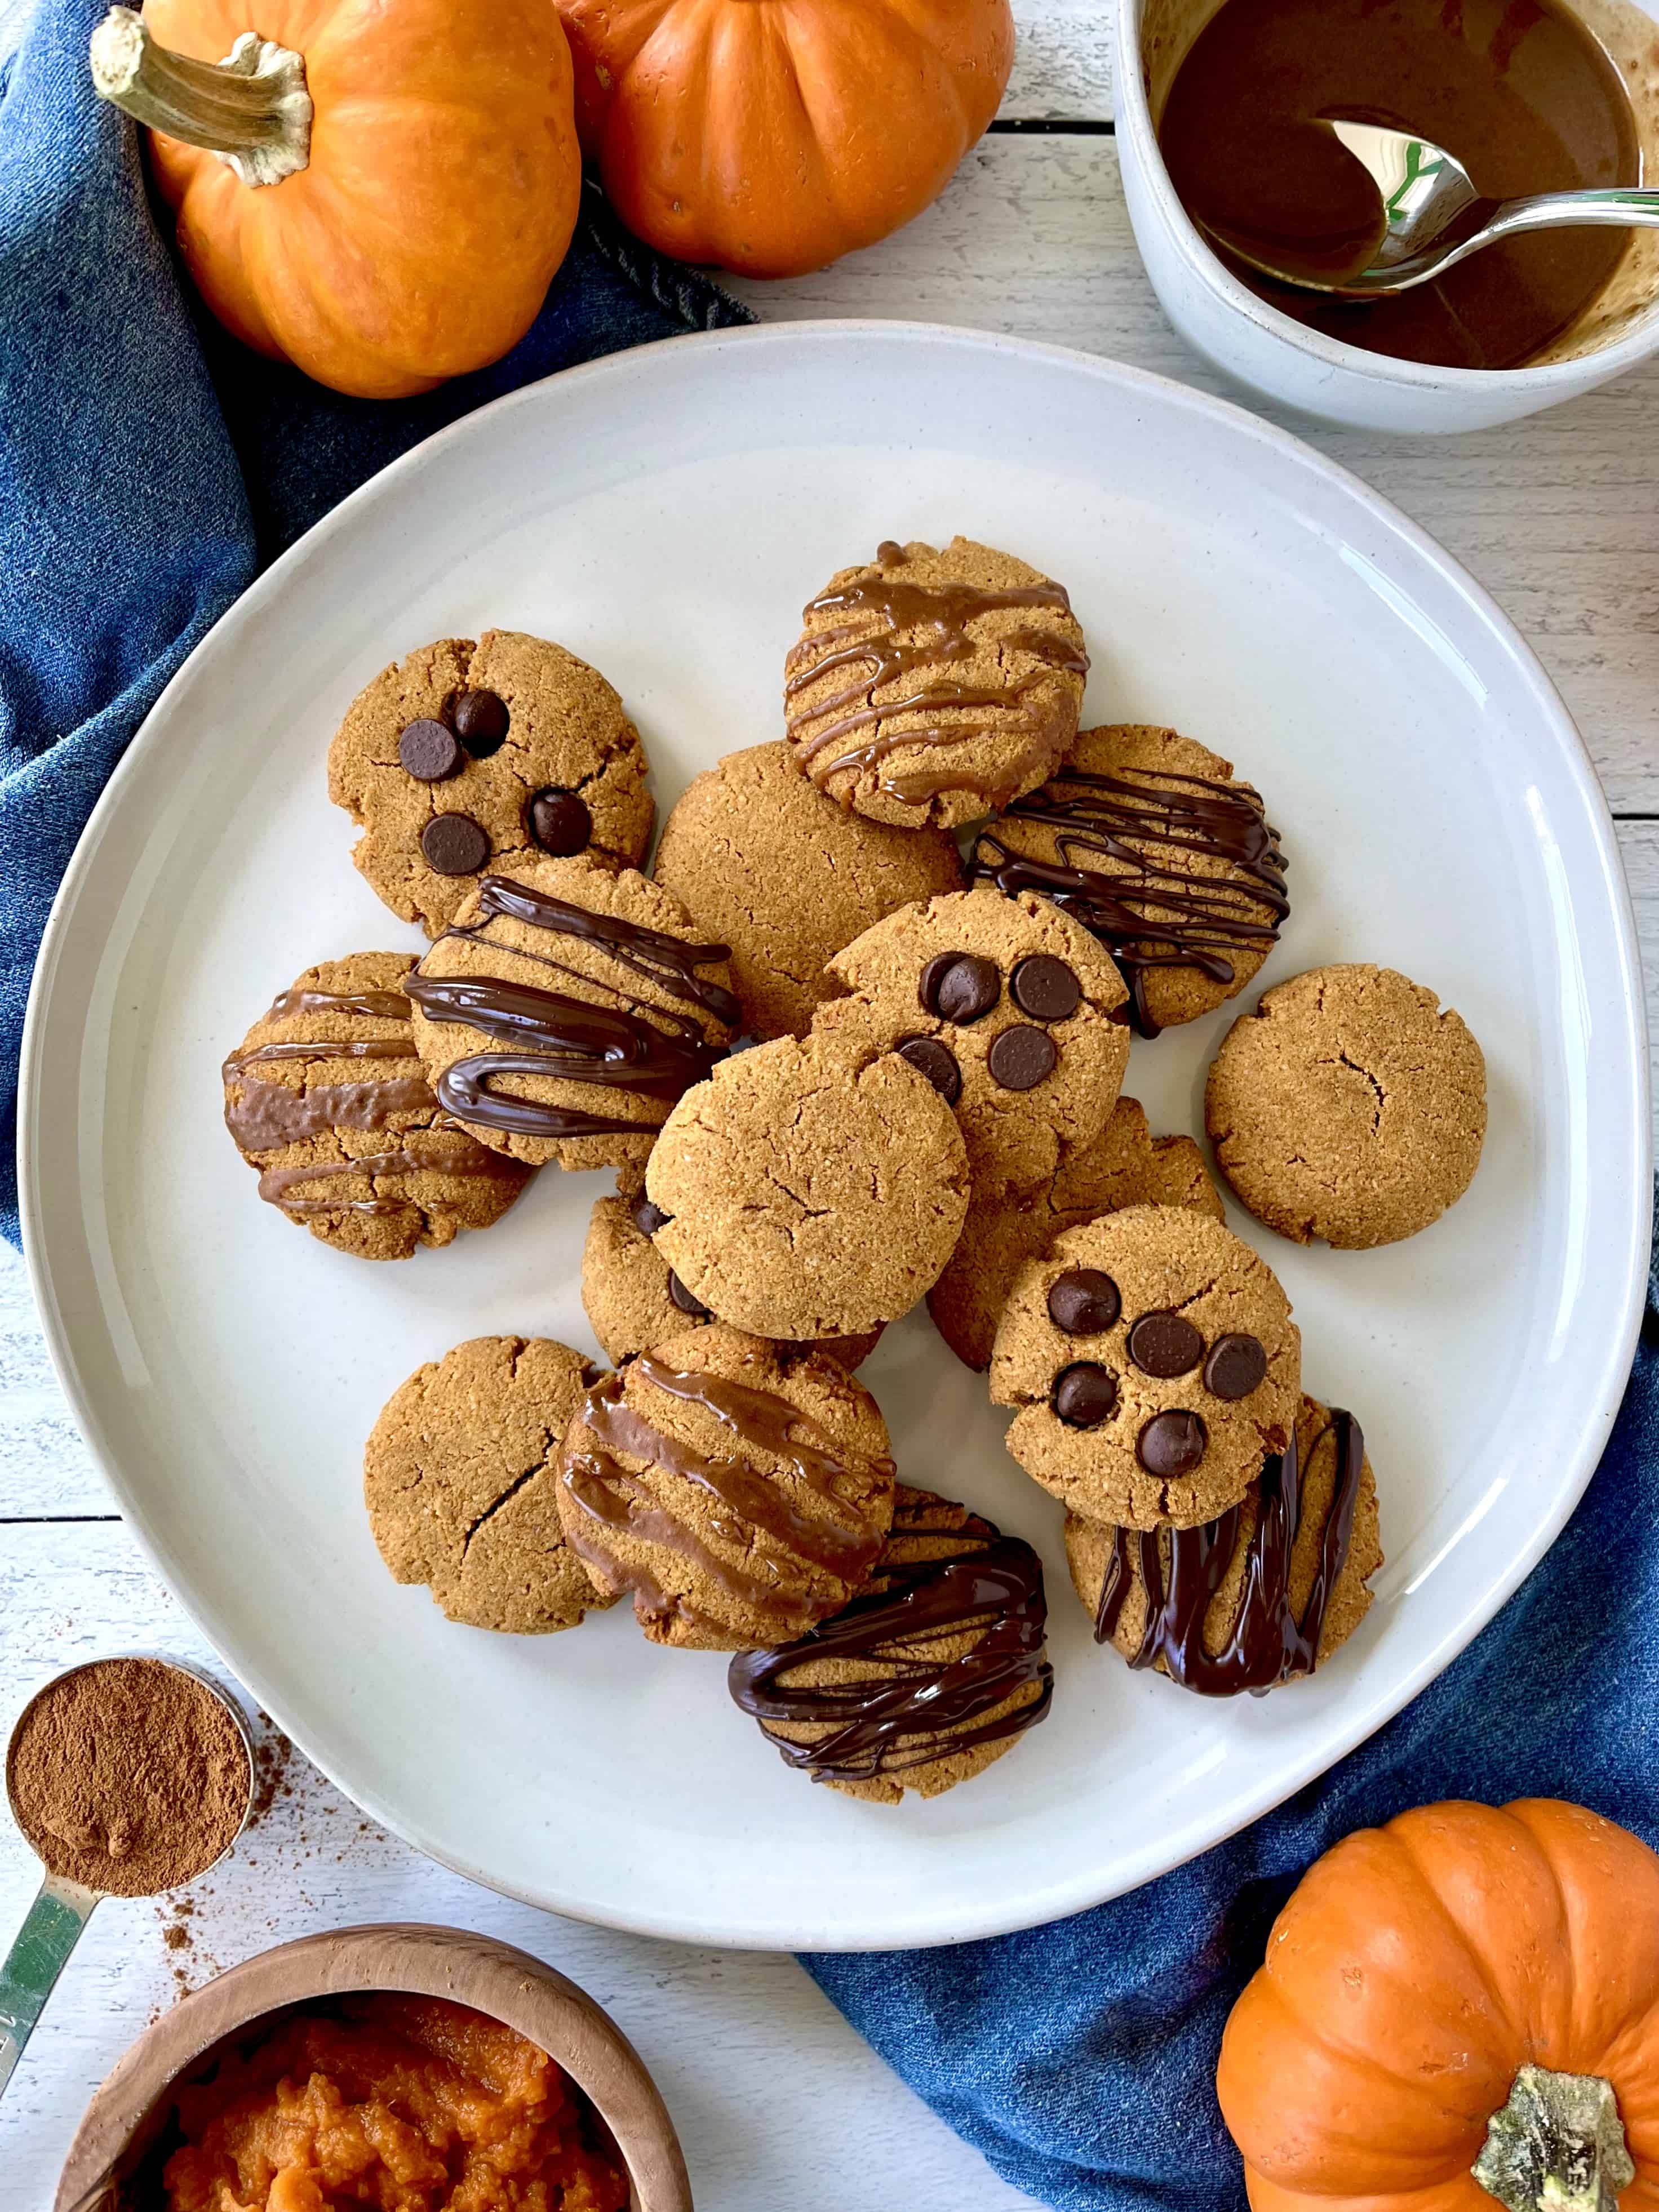 Vegan pumpkin cookies piled on a plate, some with chocolate chips, some with a chocolate or caramel drizzle, some plain.